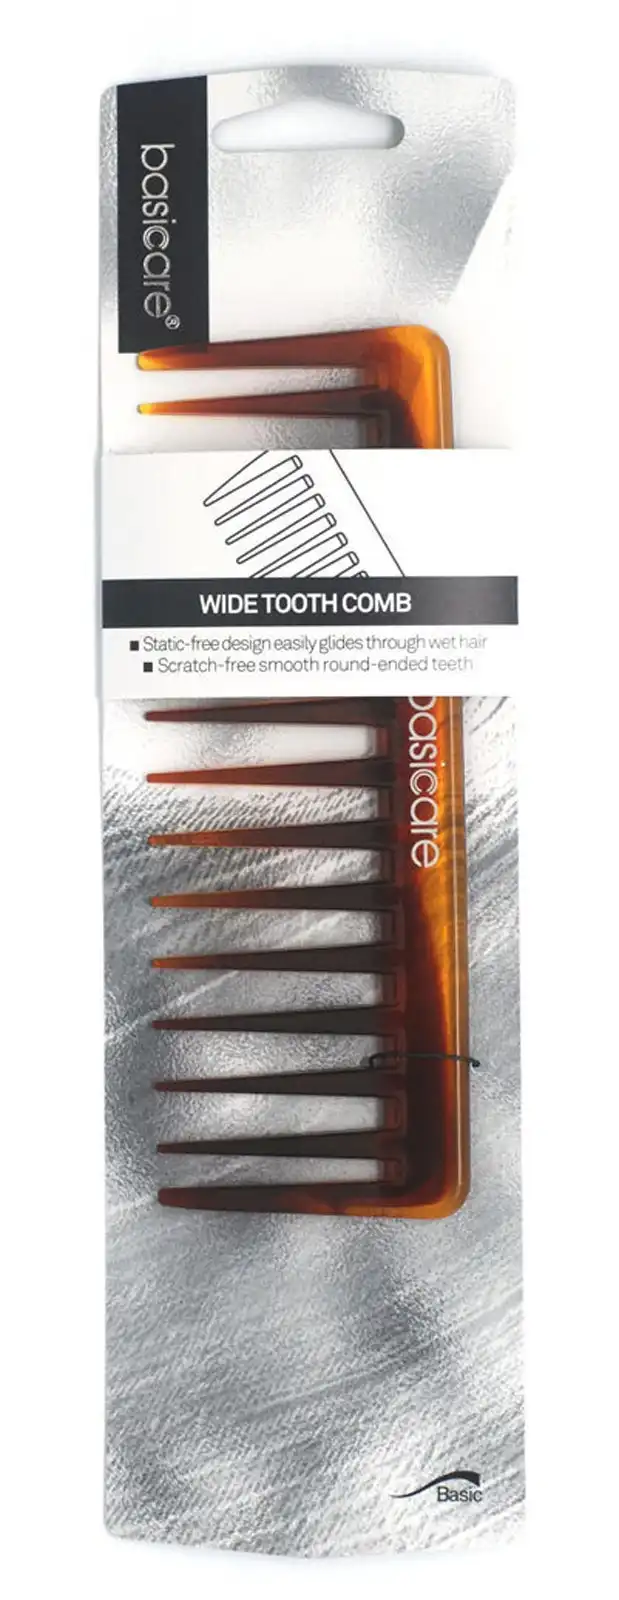 Basicare Wide Tooth Comb